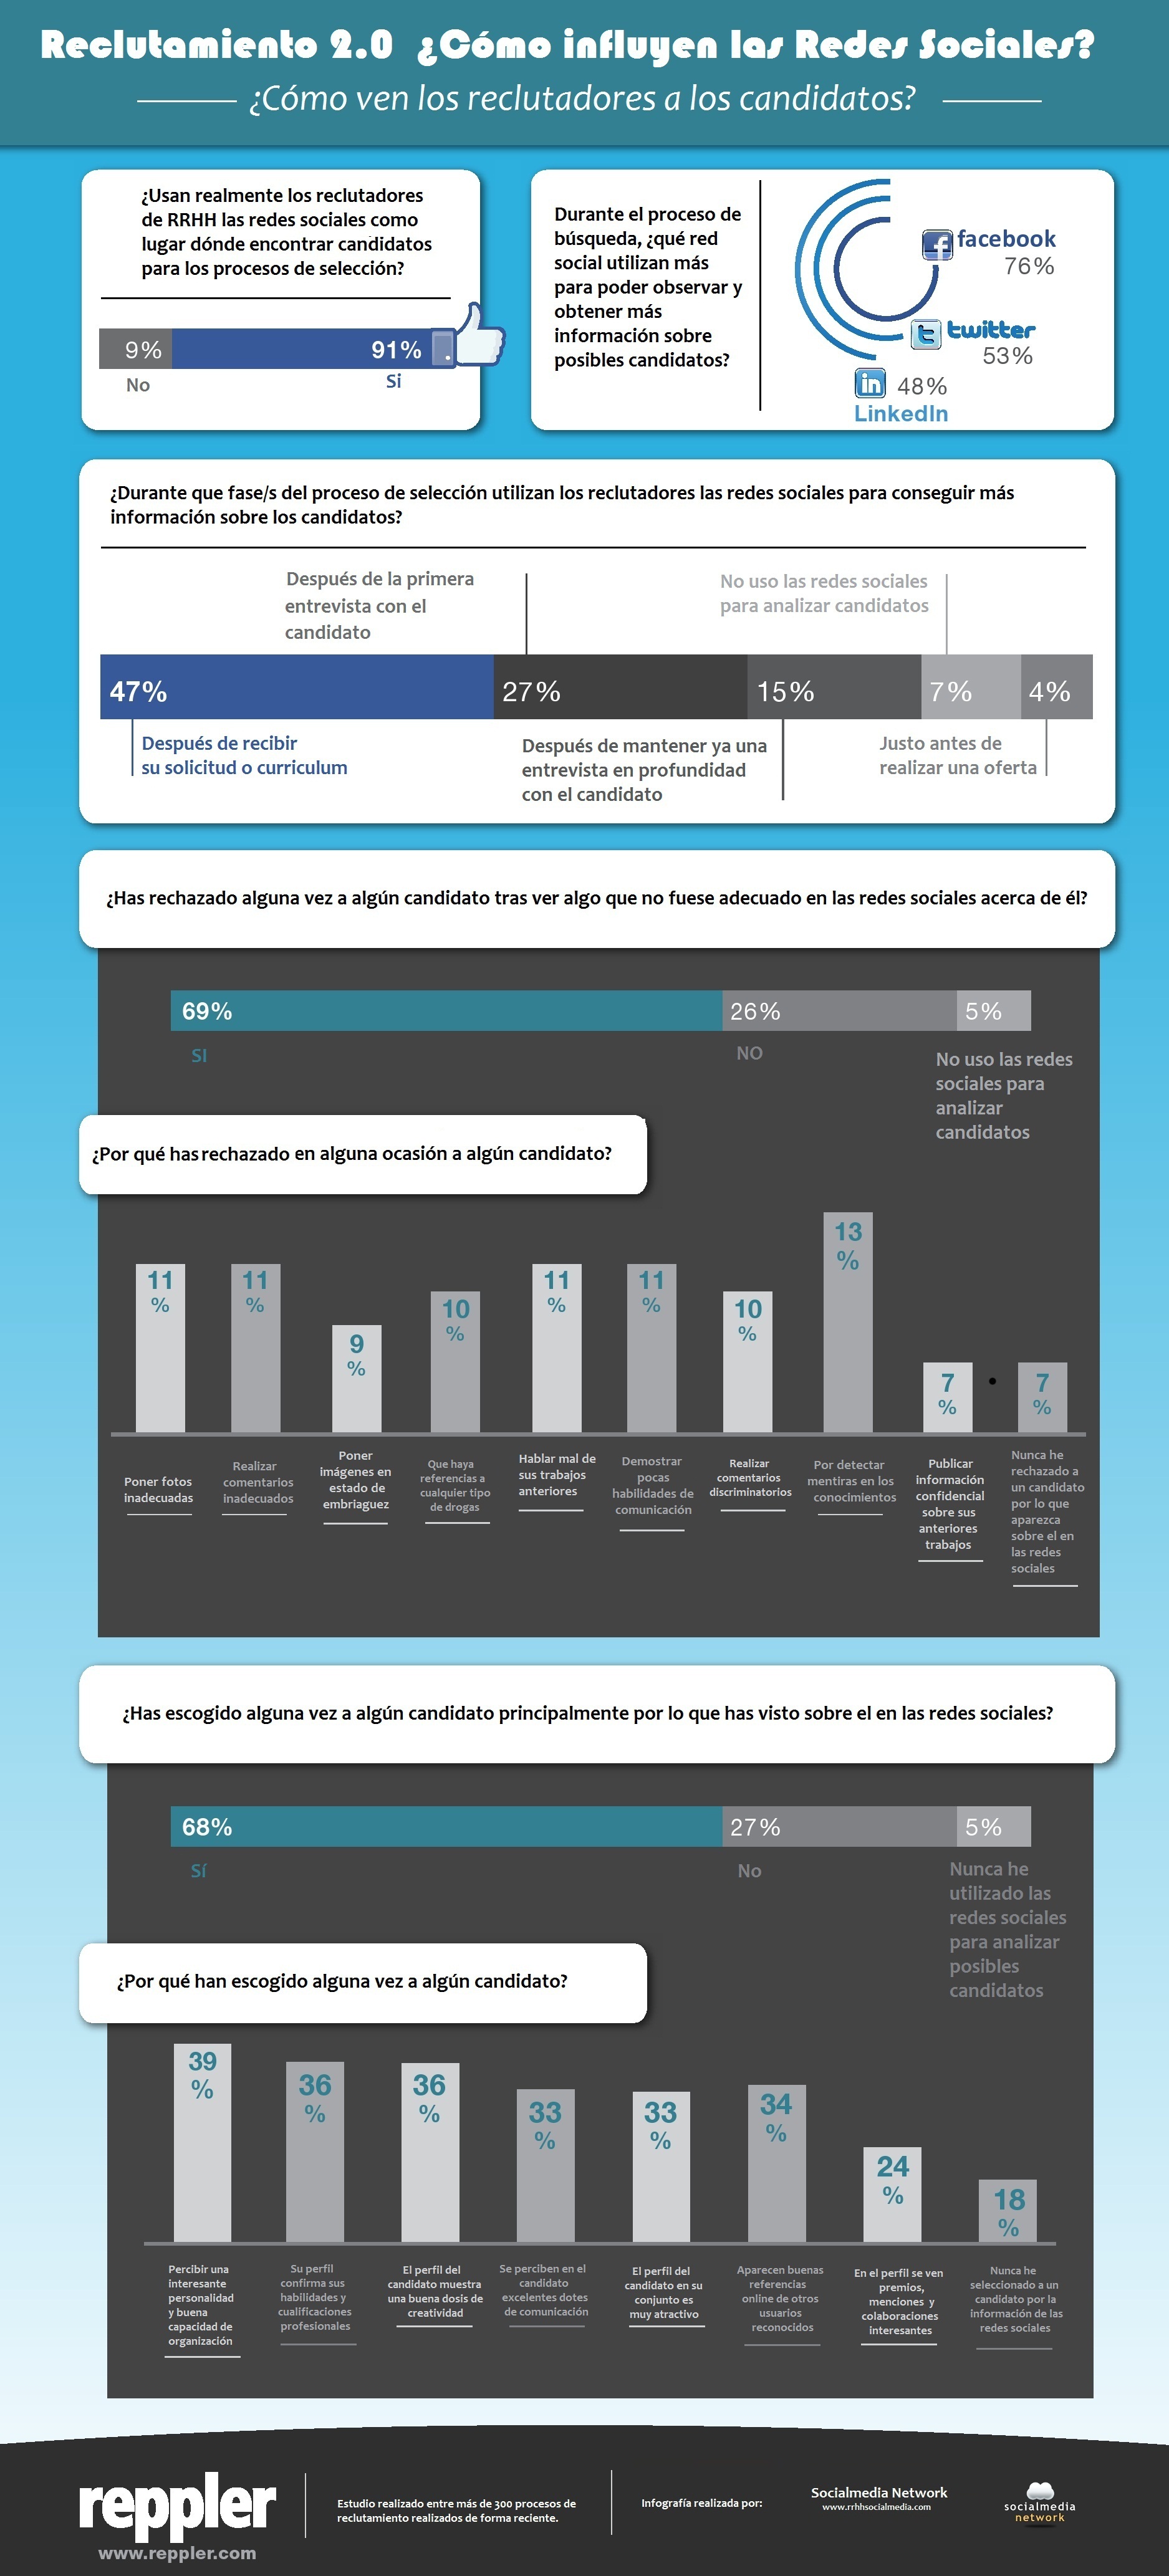 reppler-infographic-job-screening-with-social-networks2